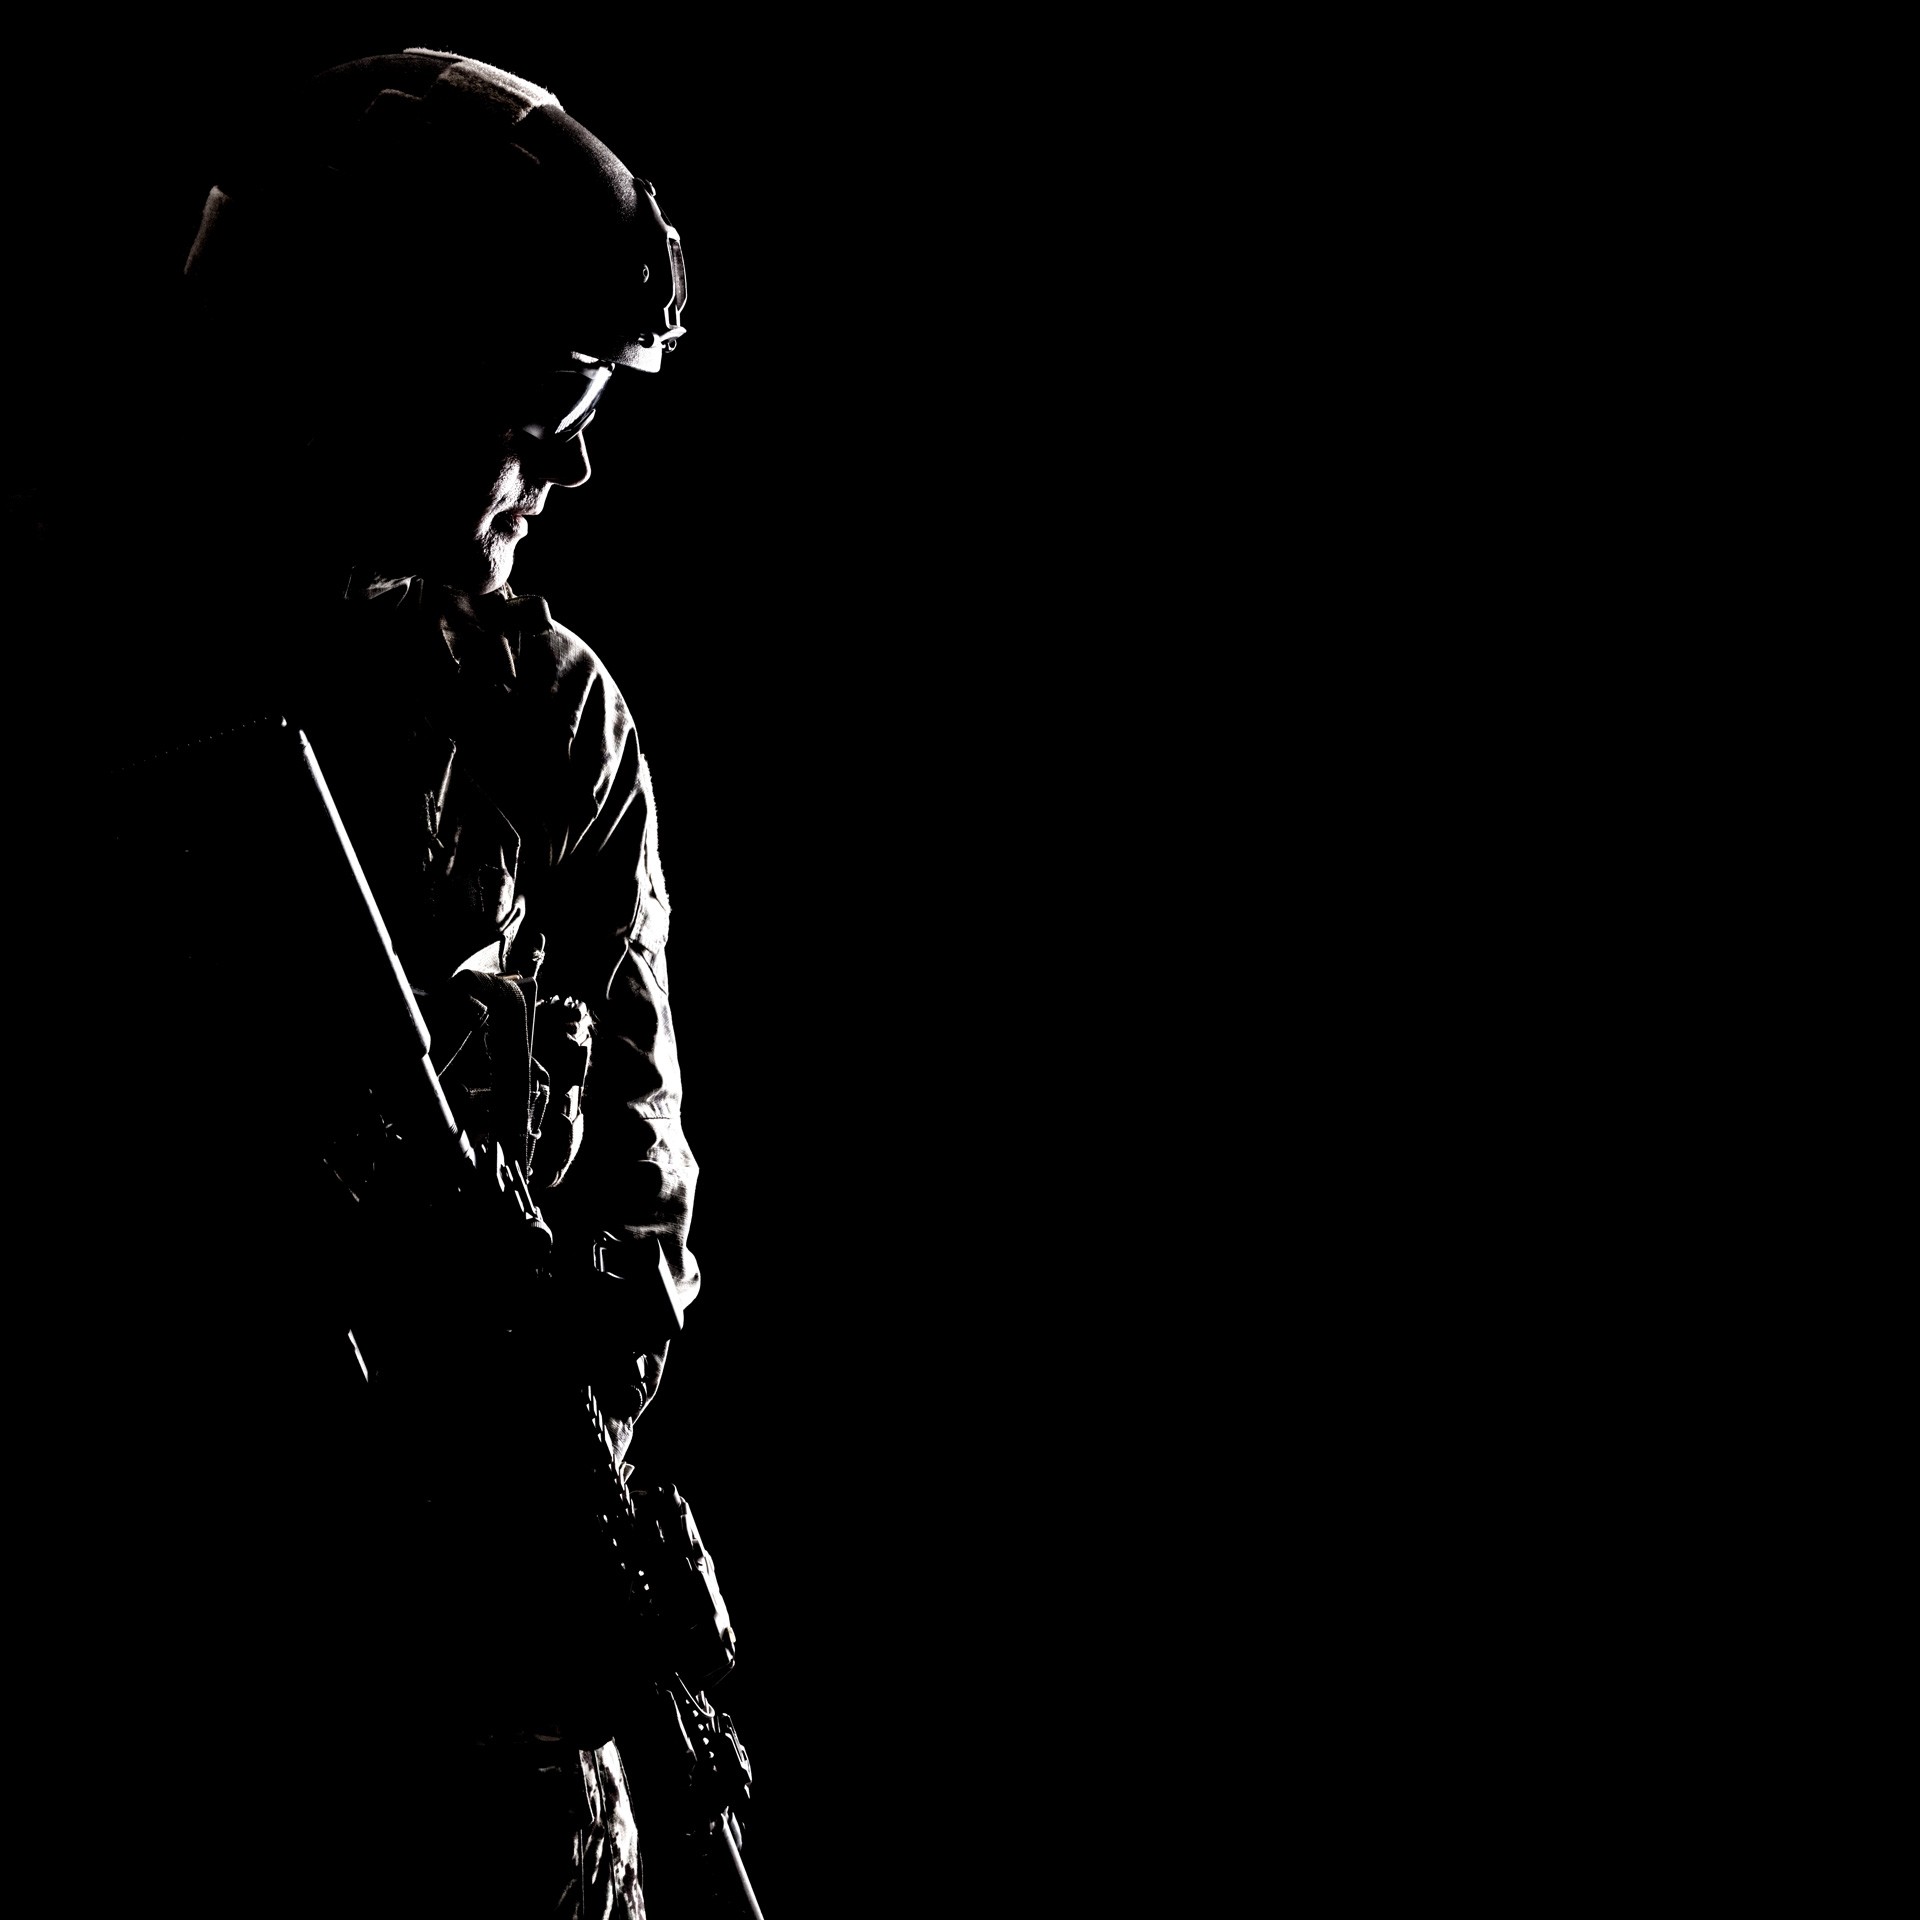 PTSD Affects More Than Just Male Veterans